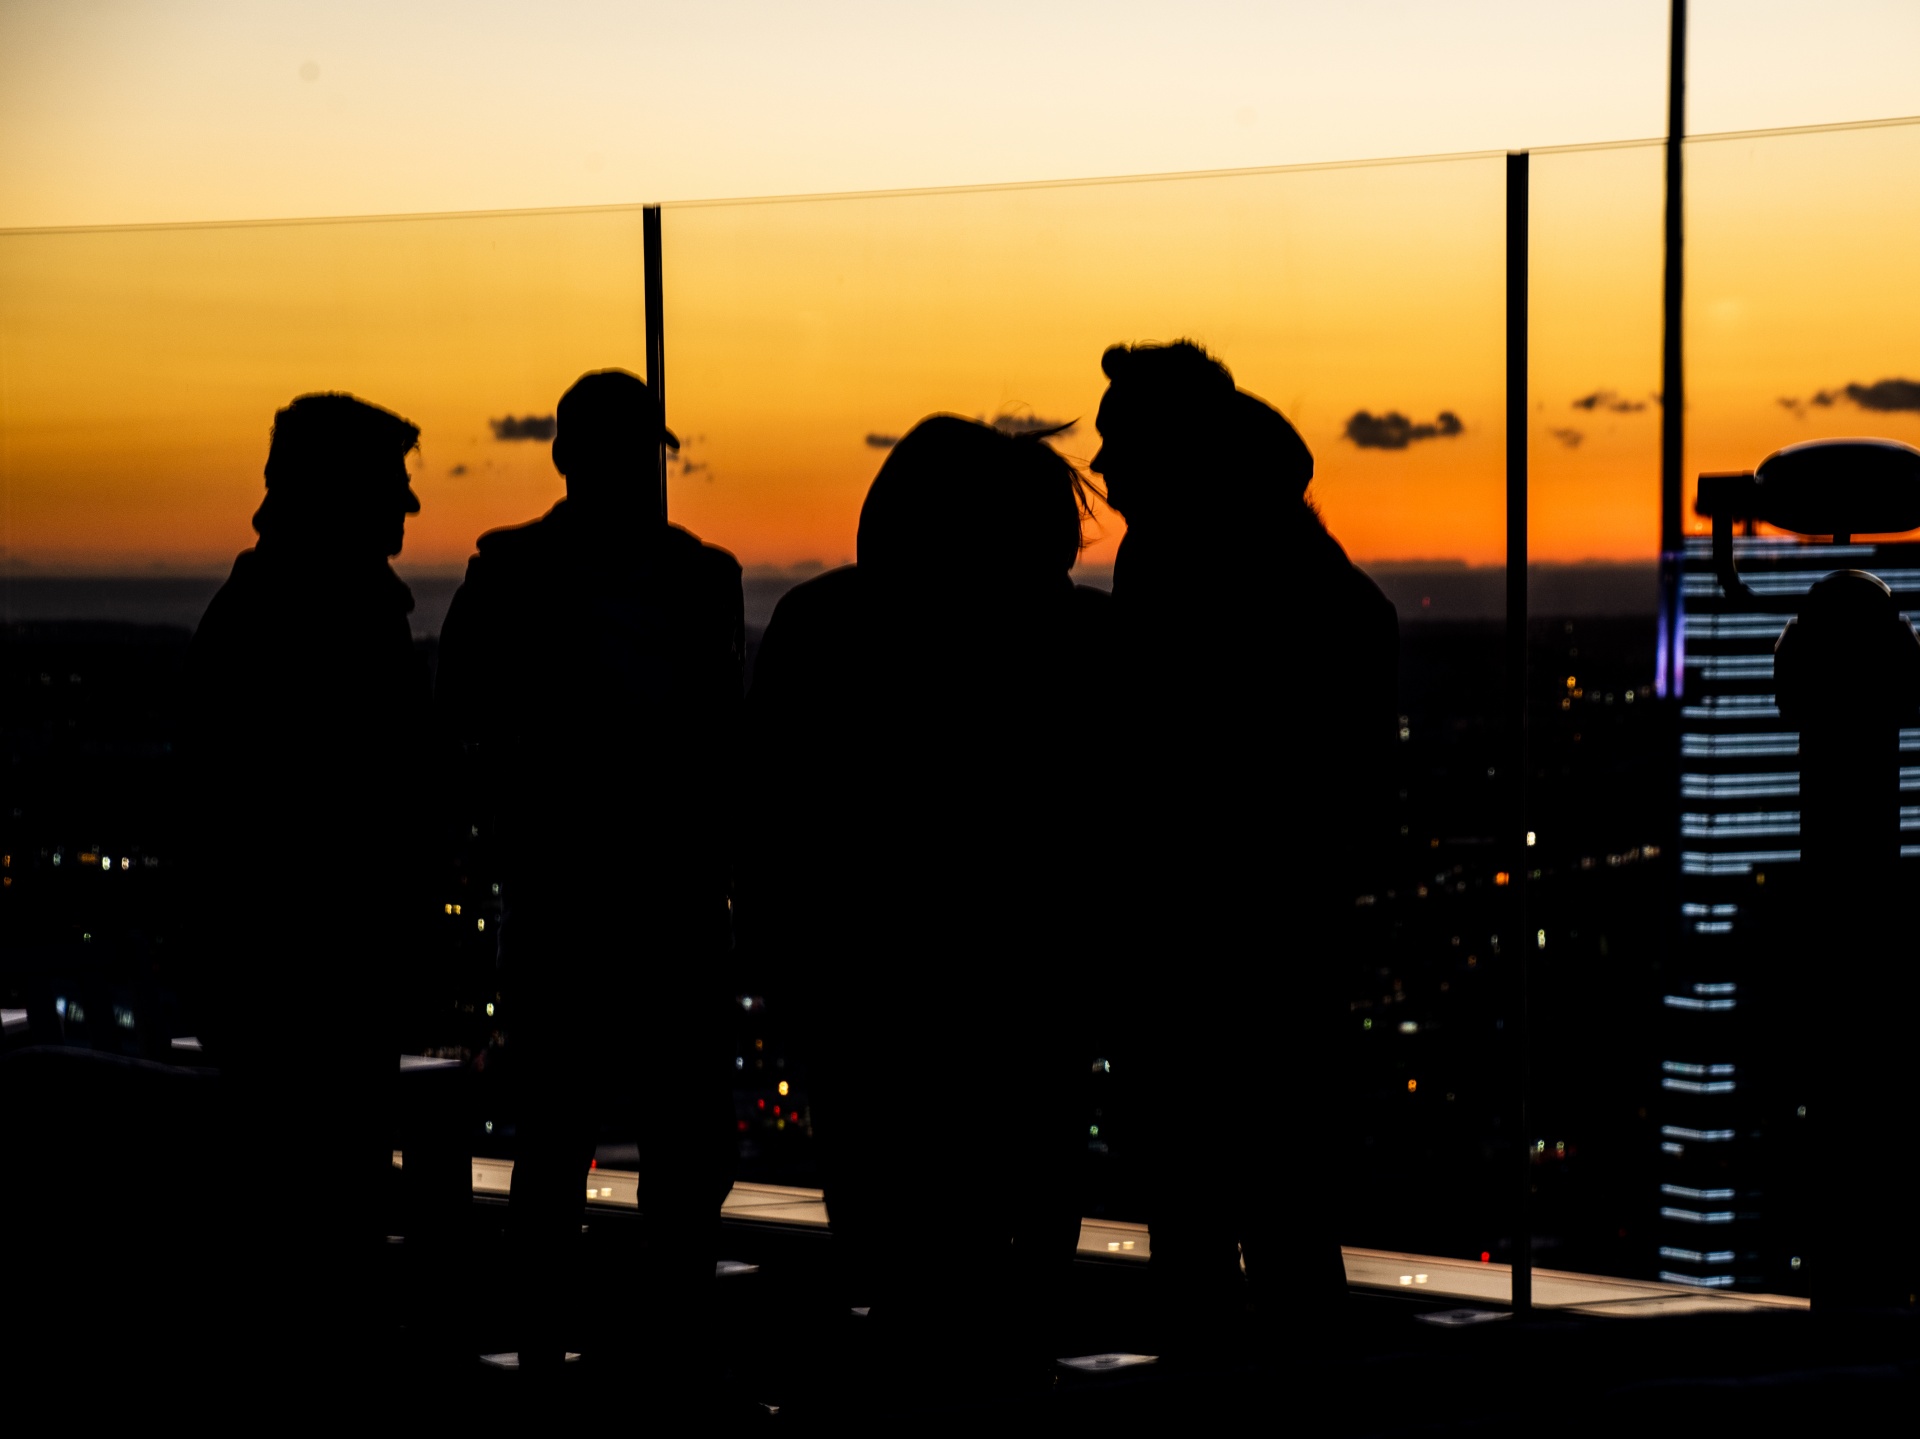 People Silhouette At Sunset